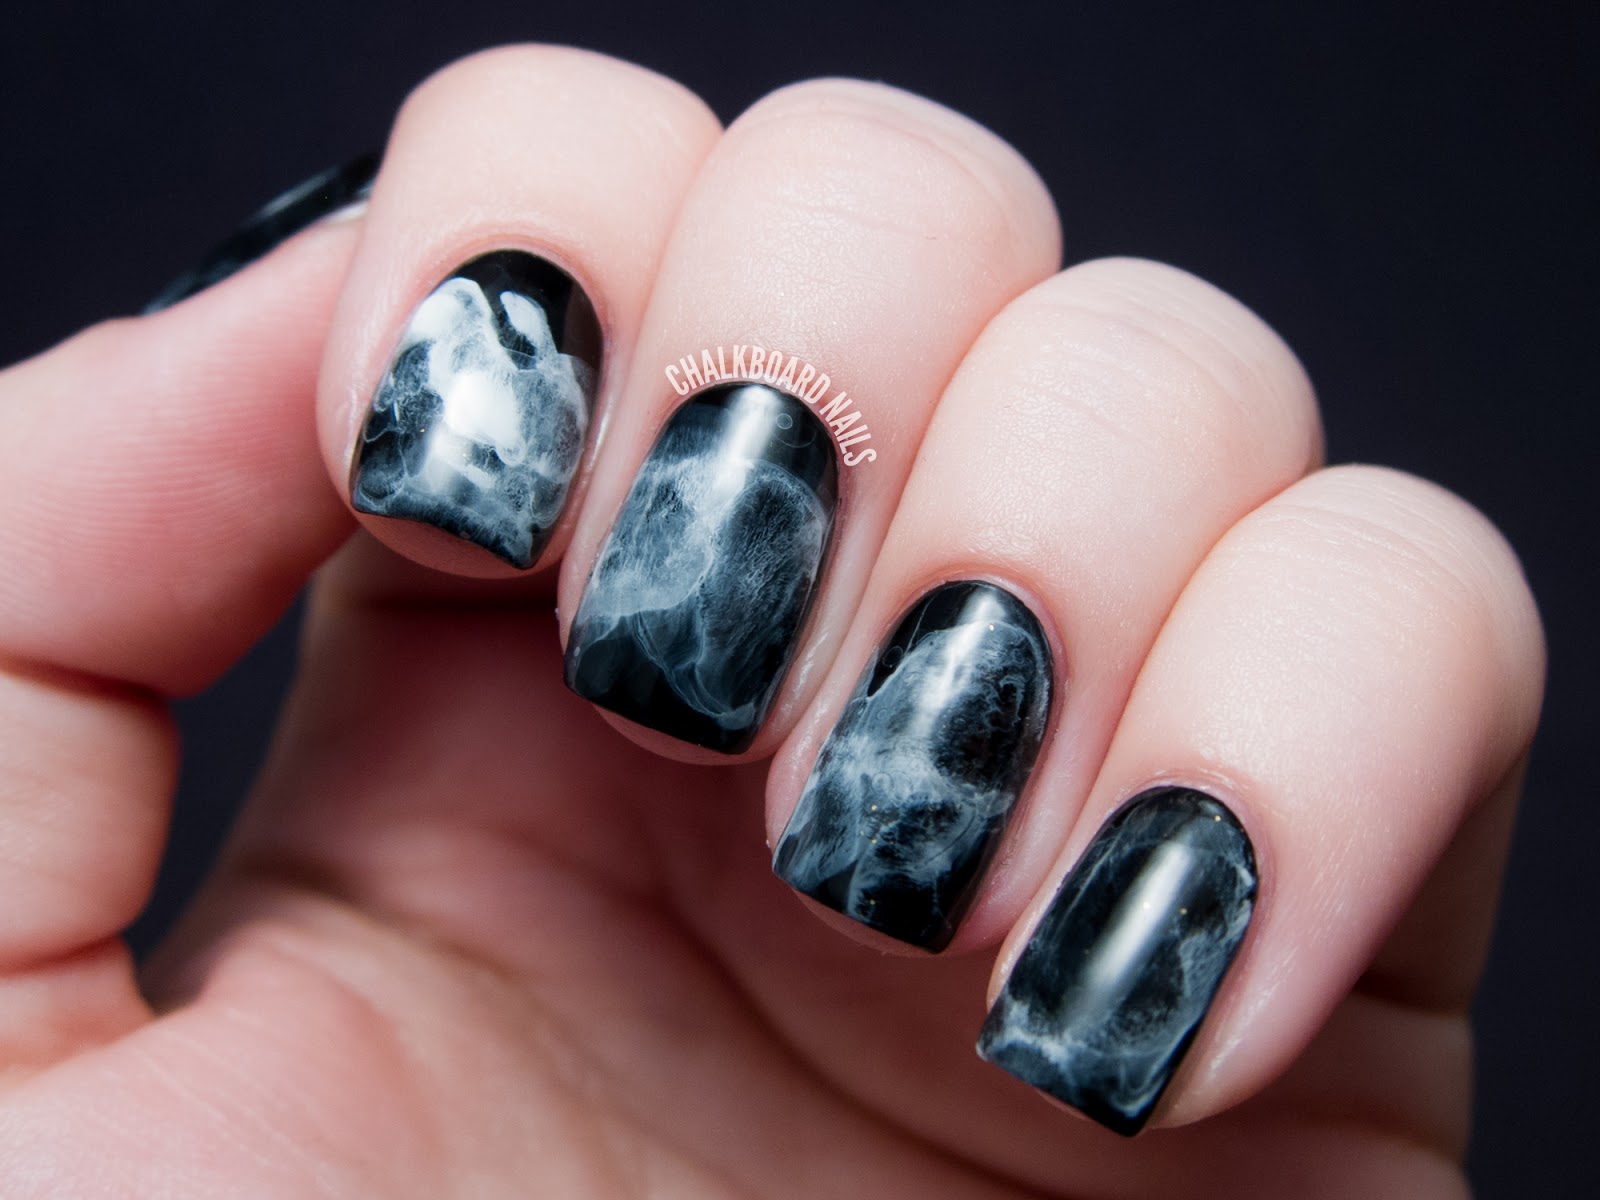 5. Black and White Floral Nail Art - wide 8